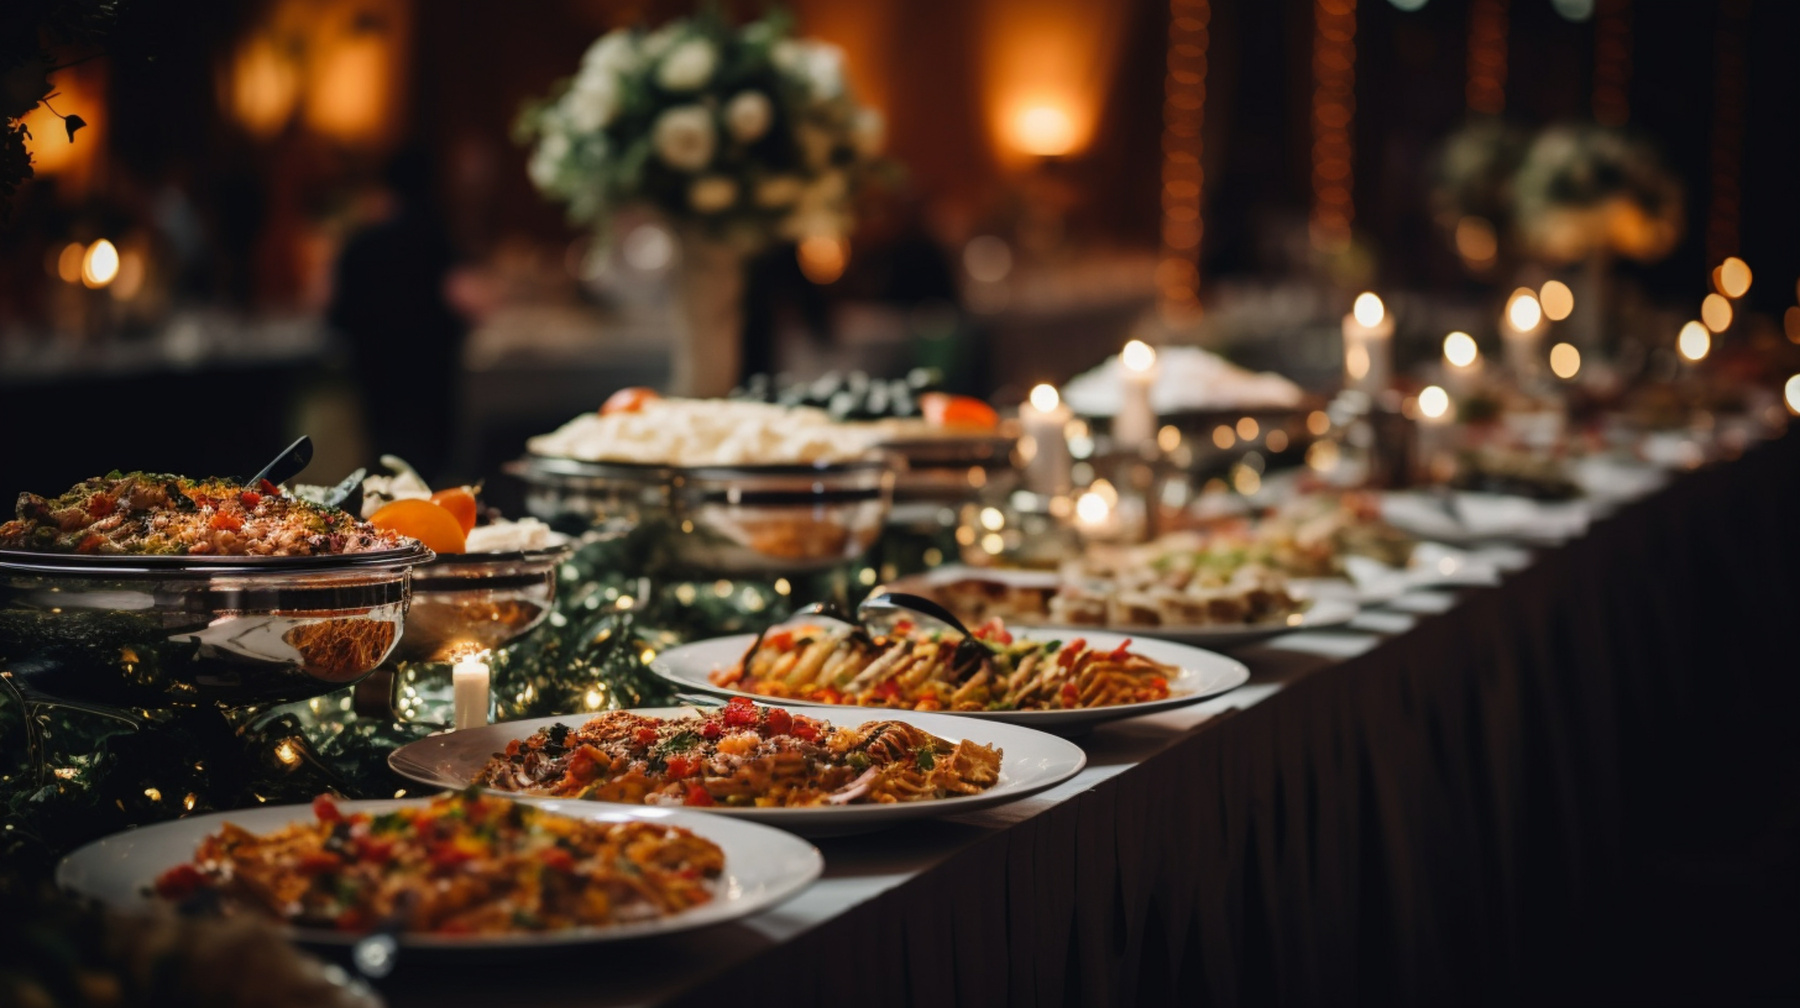 Comparison of Buffet vs. Plated: Pros and Cons